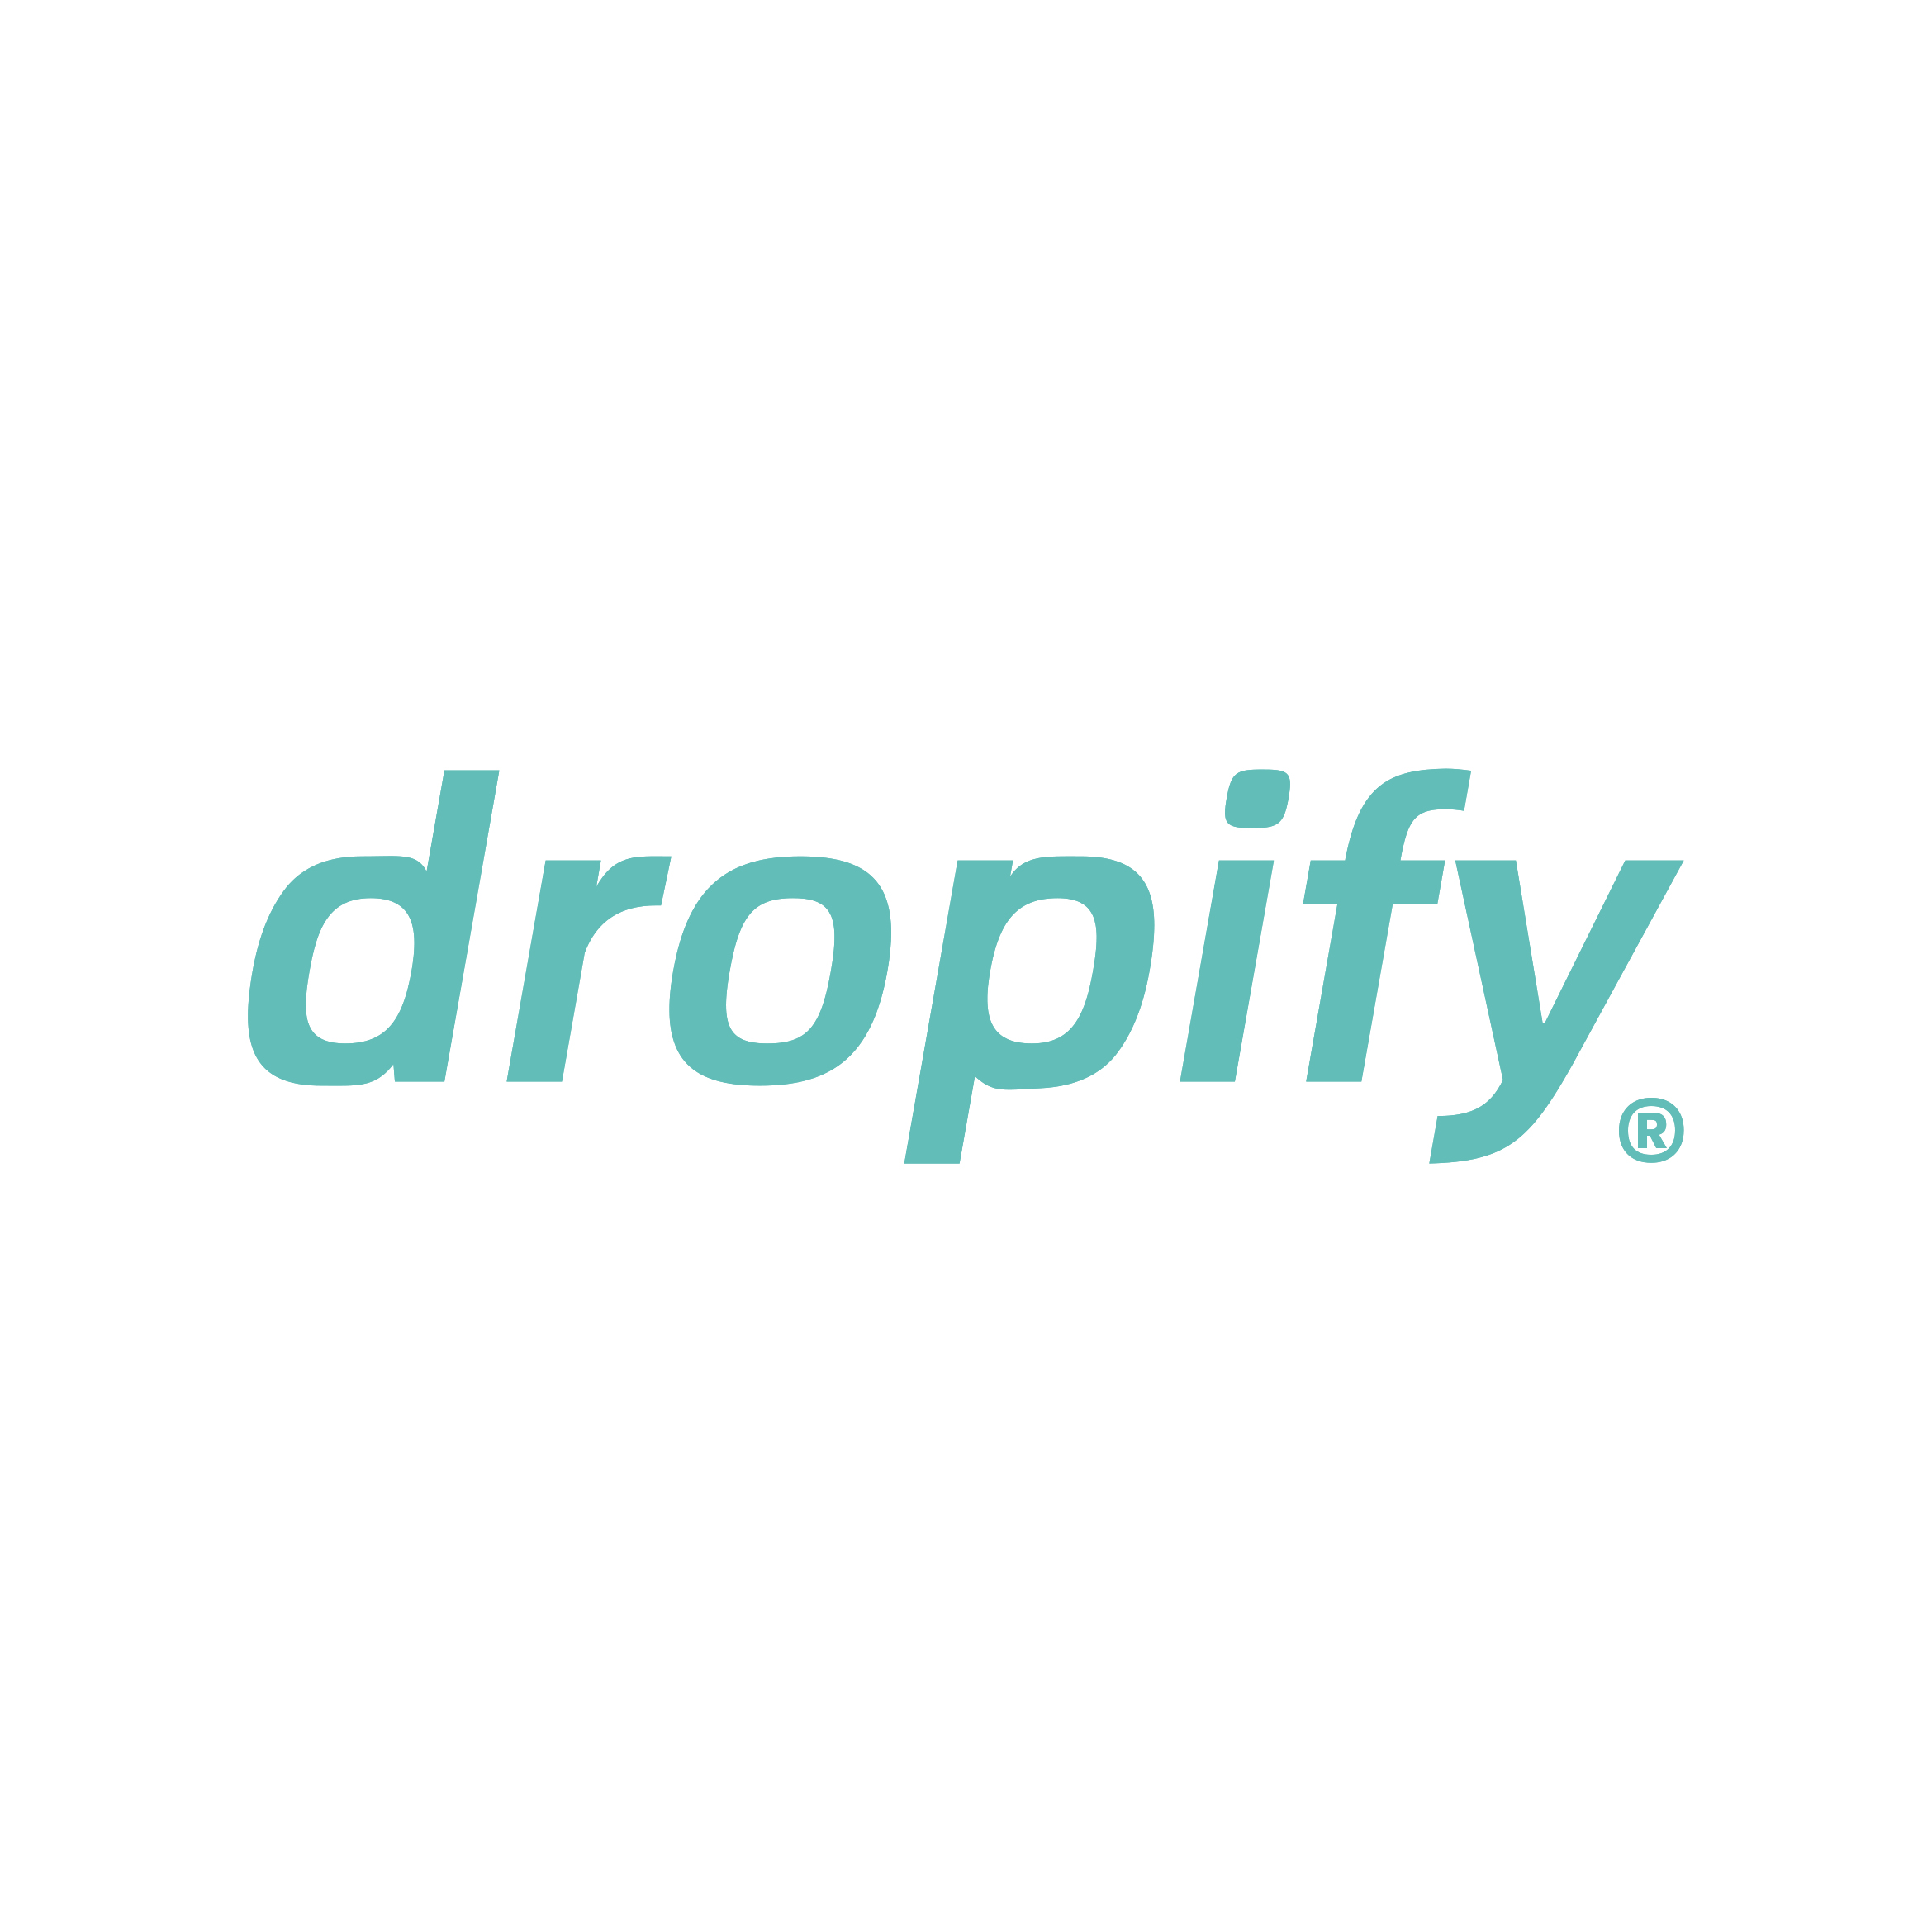 dropify® - The second largest dropshipping business company in China